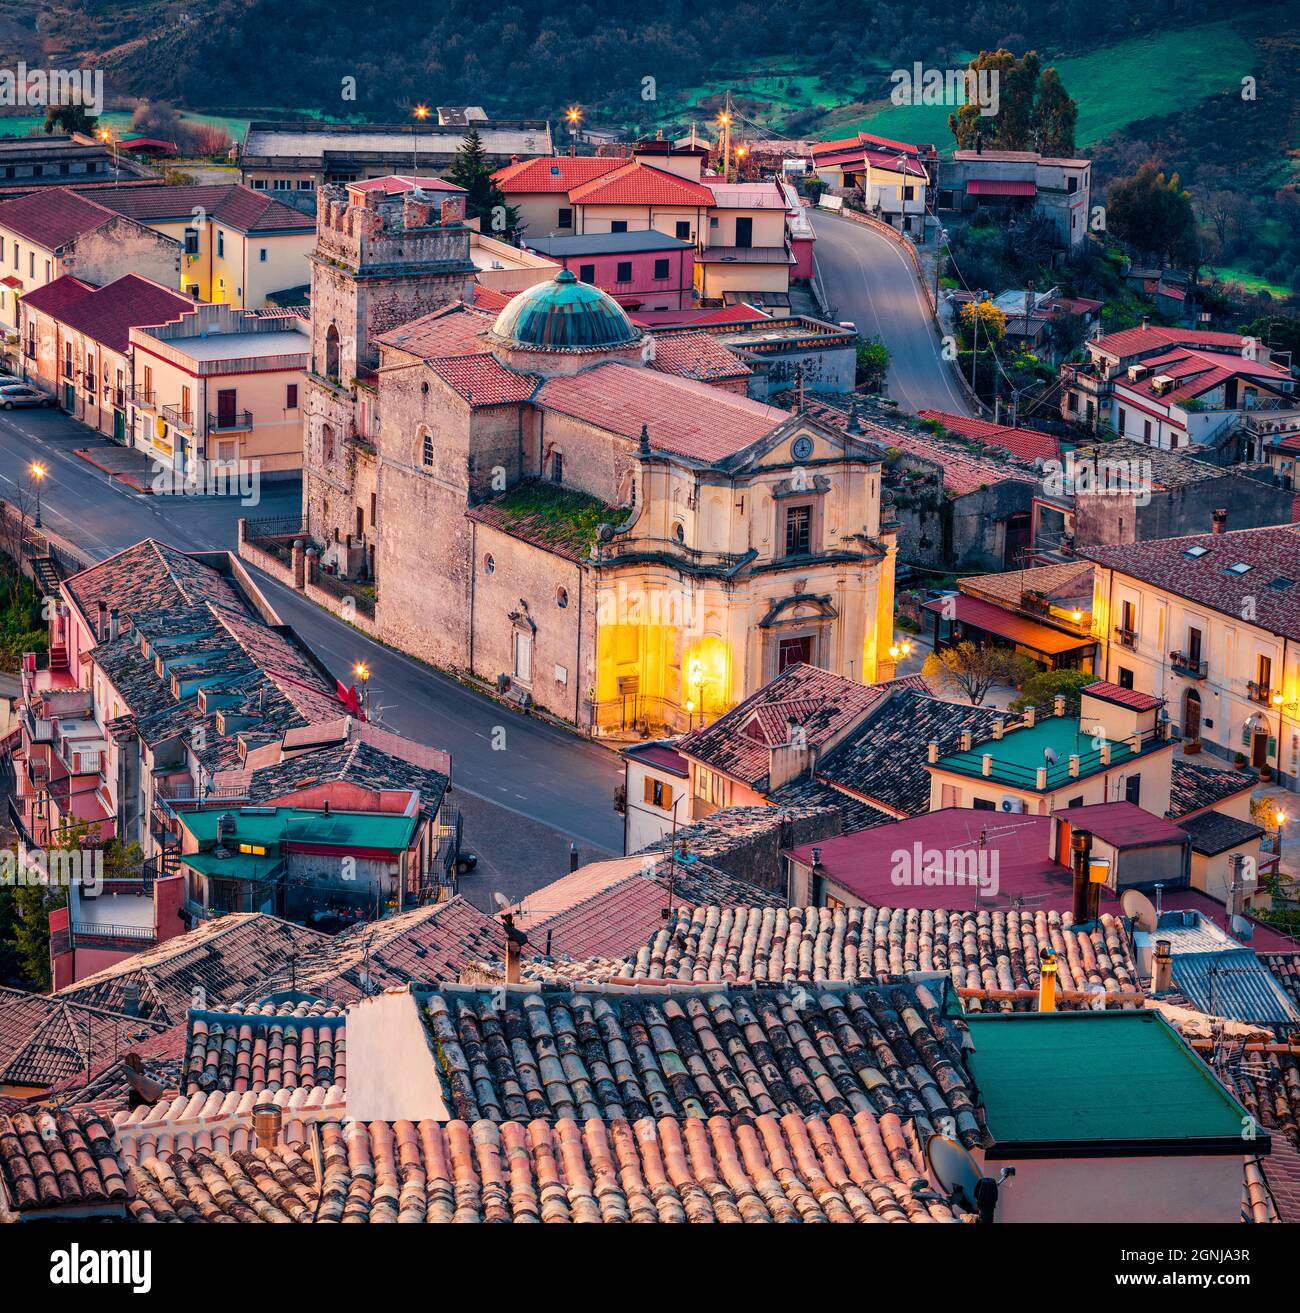 Stunning morning cityscape of Stilo town with old Piazza del palio church. Calm dawn scene of Apulia, Italy, Europe. Traveling concept background. Stock Photo